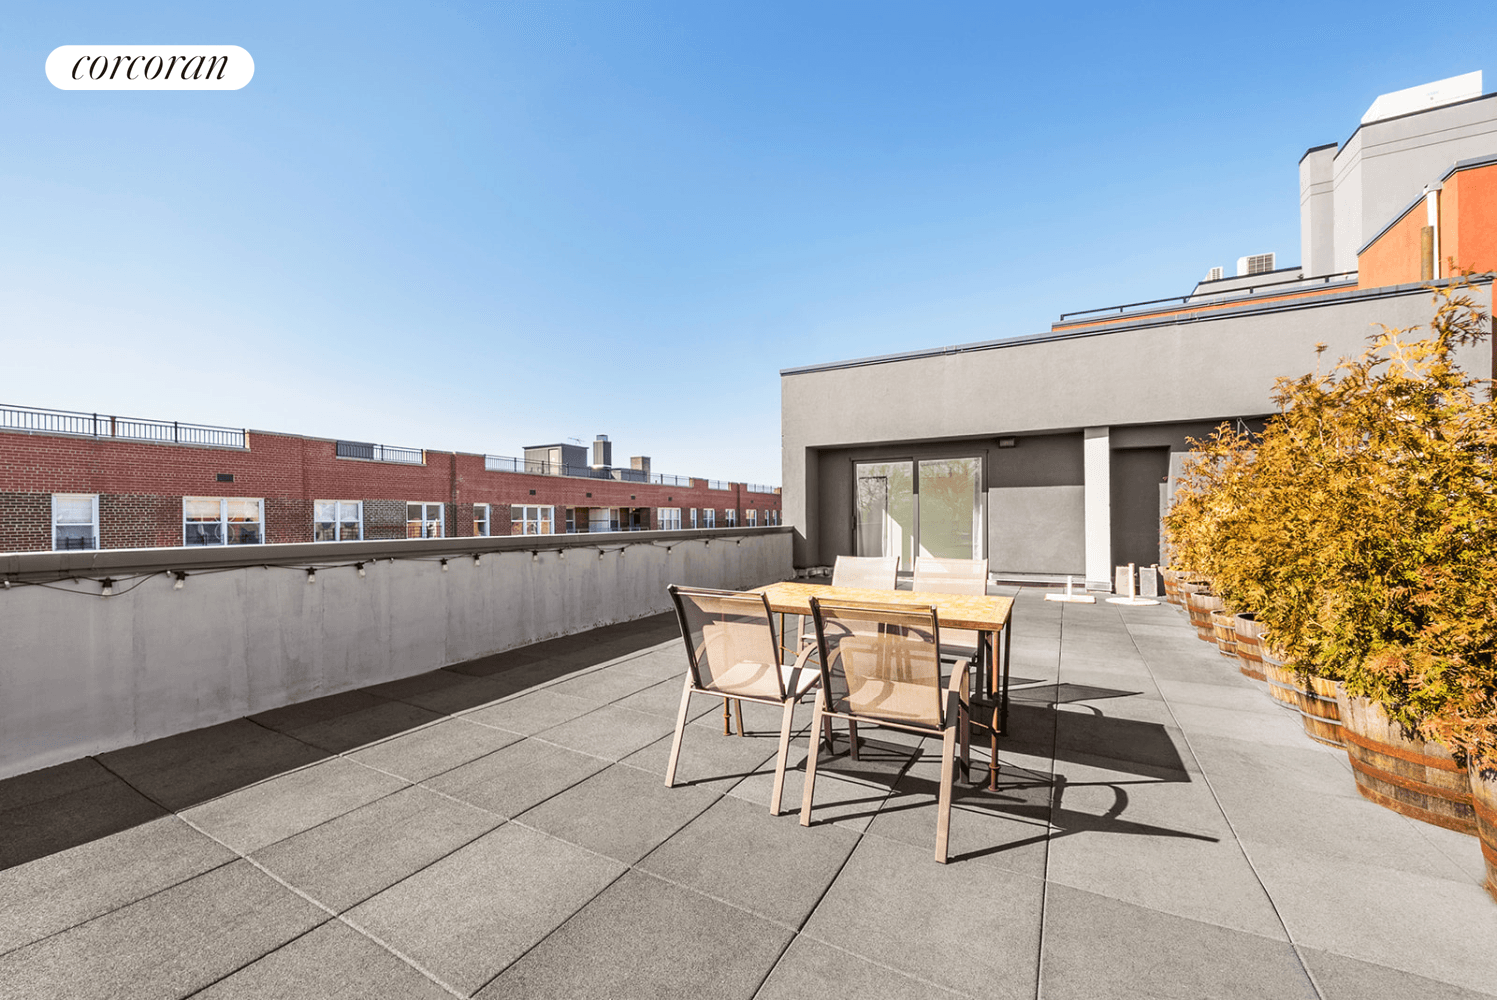 Stunning sunrise and sunset views from this PENTHOUSE, one bedroom with a 1000 sq ft PRIVATE ROOFDECK, with landscaping, as well as a balcony off the living room with Manhattan ...